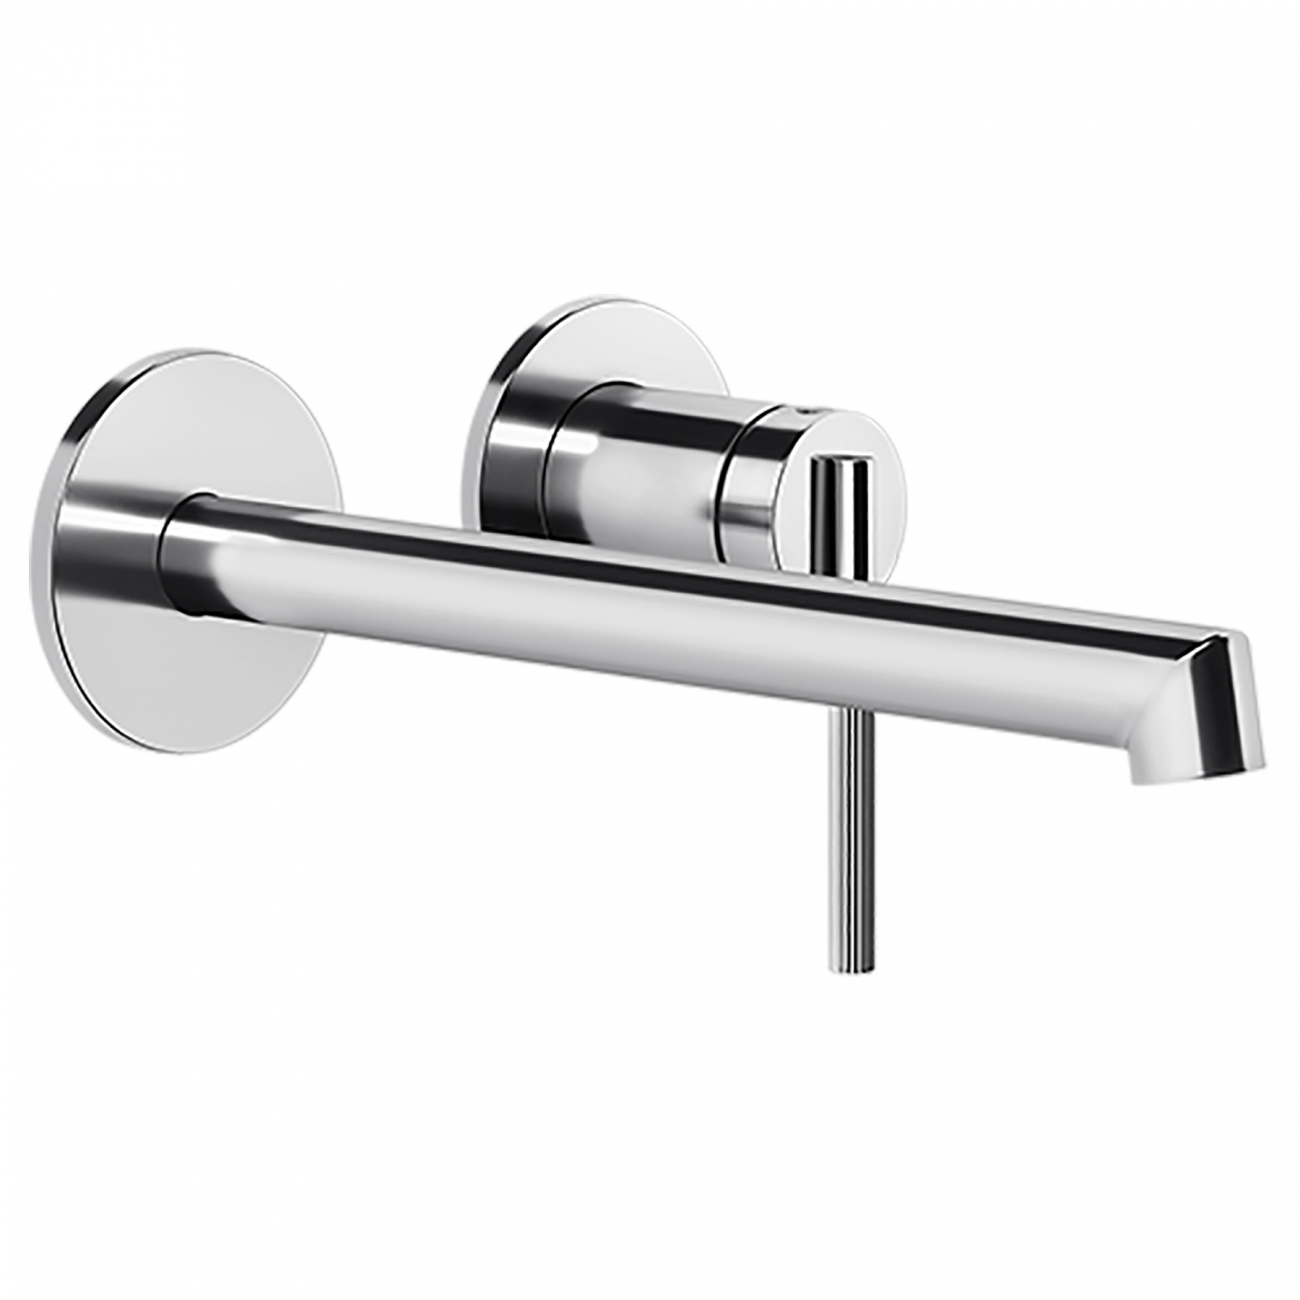 Details about   Gessi Ingranaggio 63855 wall mounted toilet roll holder 